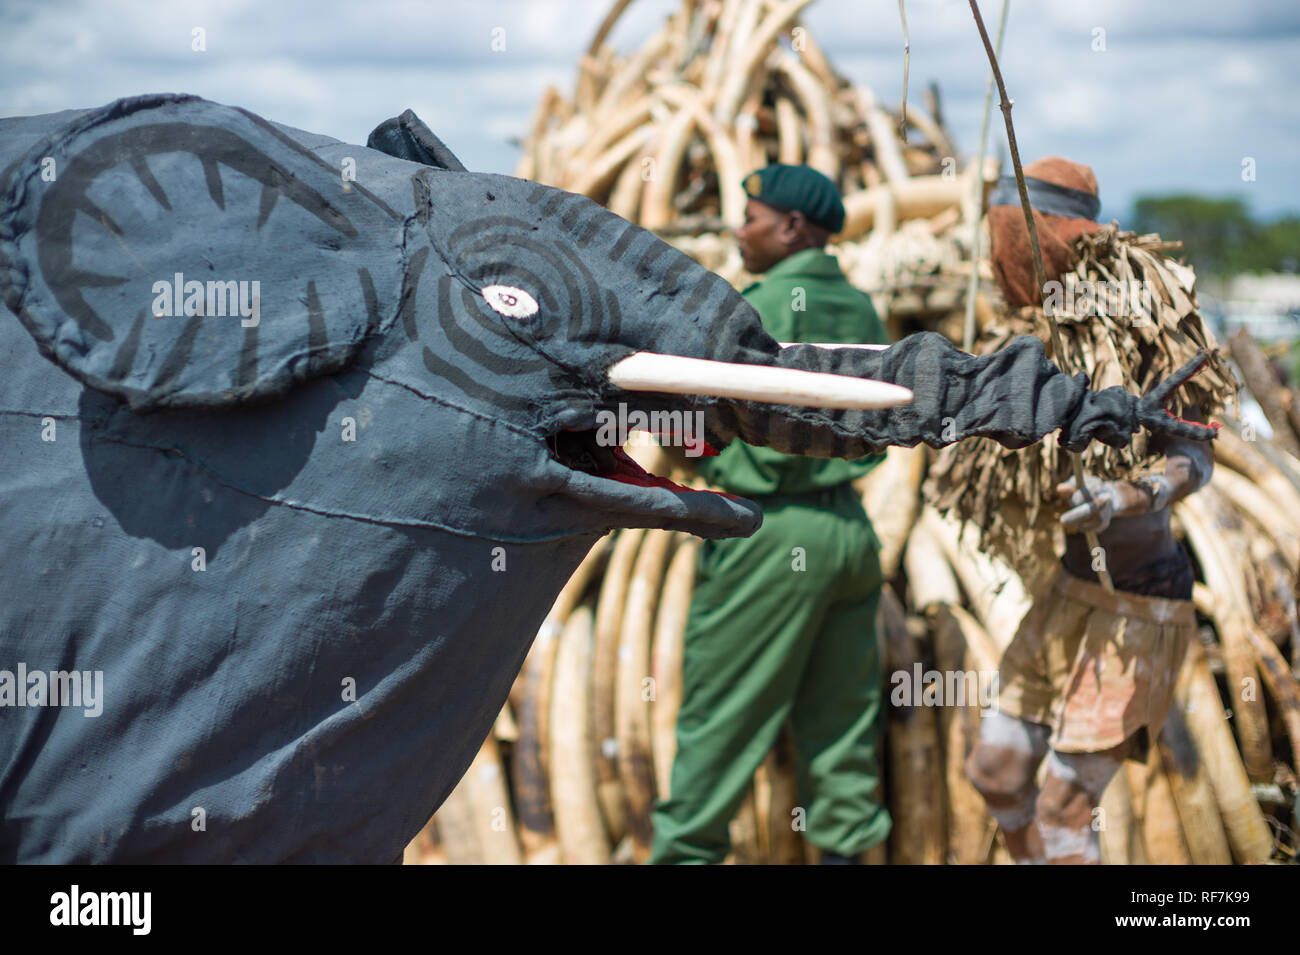 Traditional gule wamkulu tribal dancers perform a spiritual ceremony in front of confiscated elephant ivory scheduled to burn, Lilongwe Malawi Stock Photo